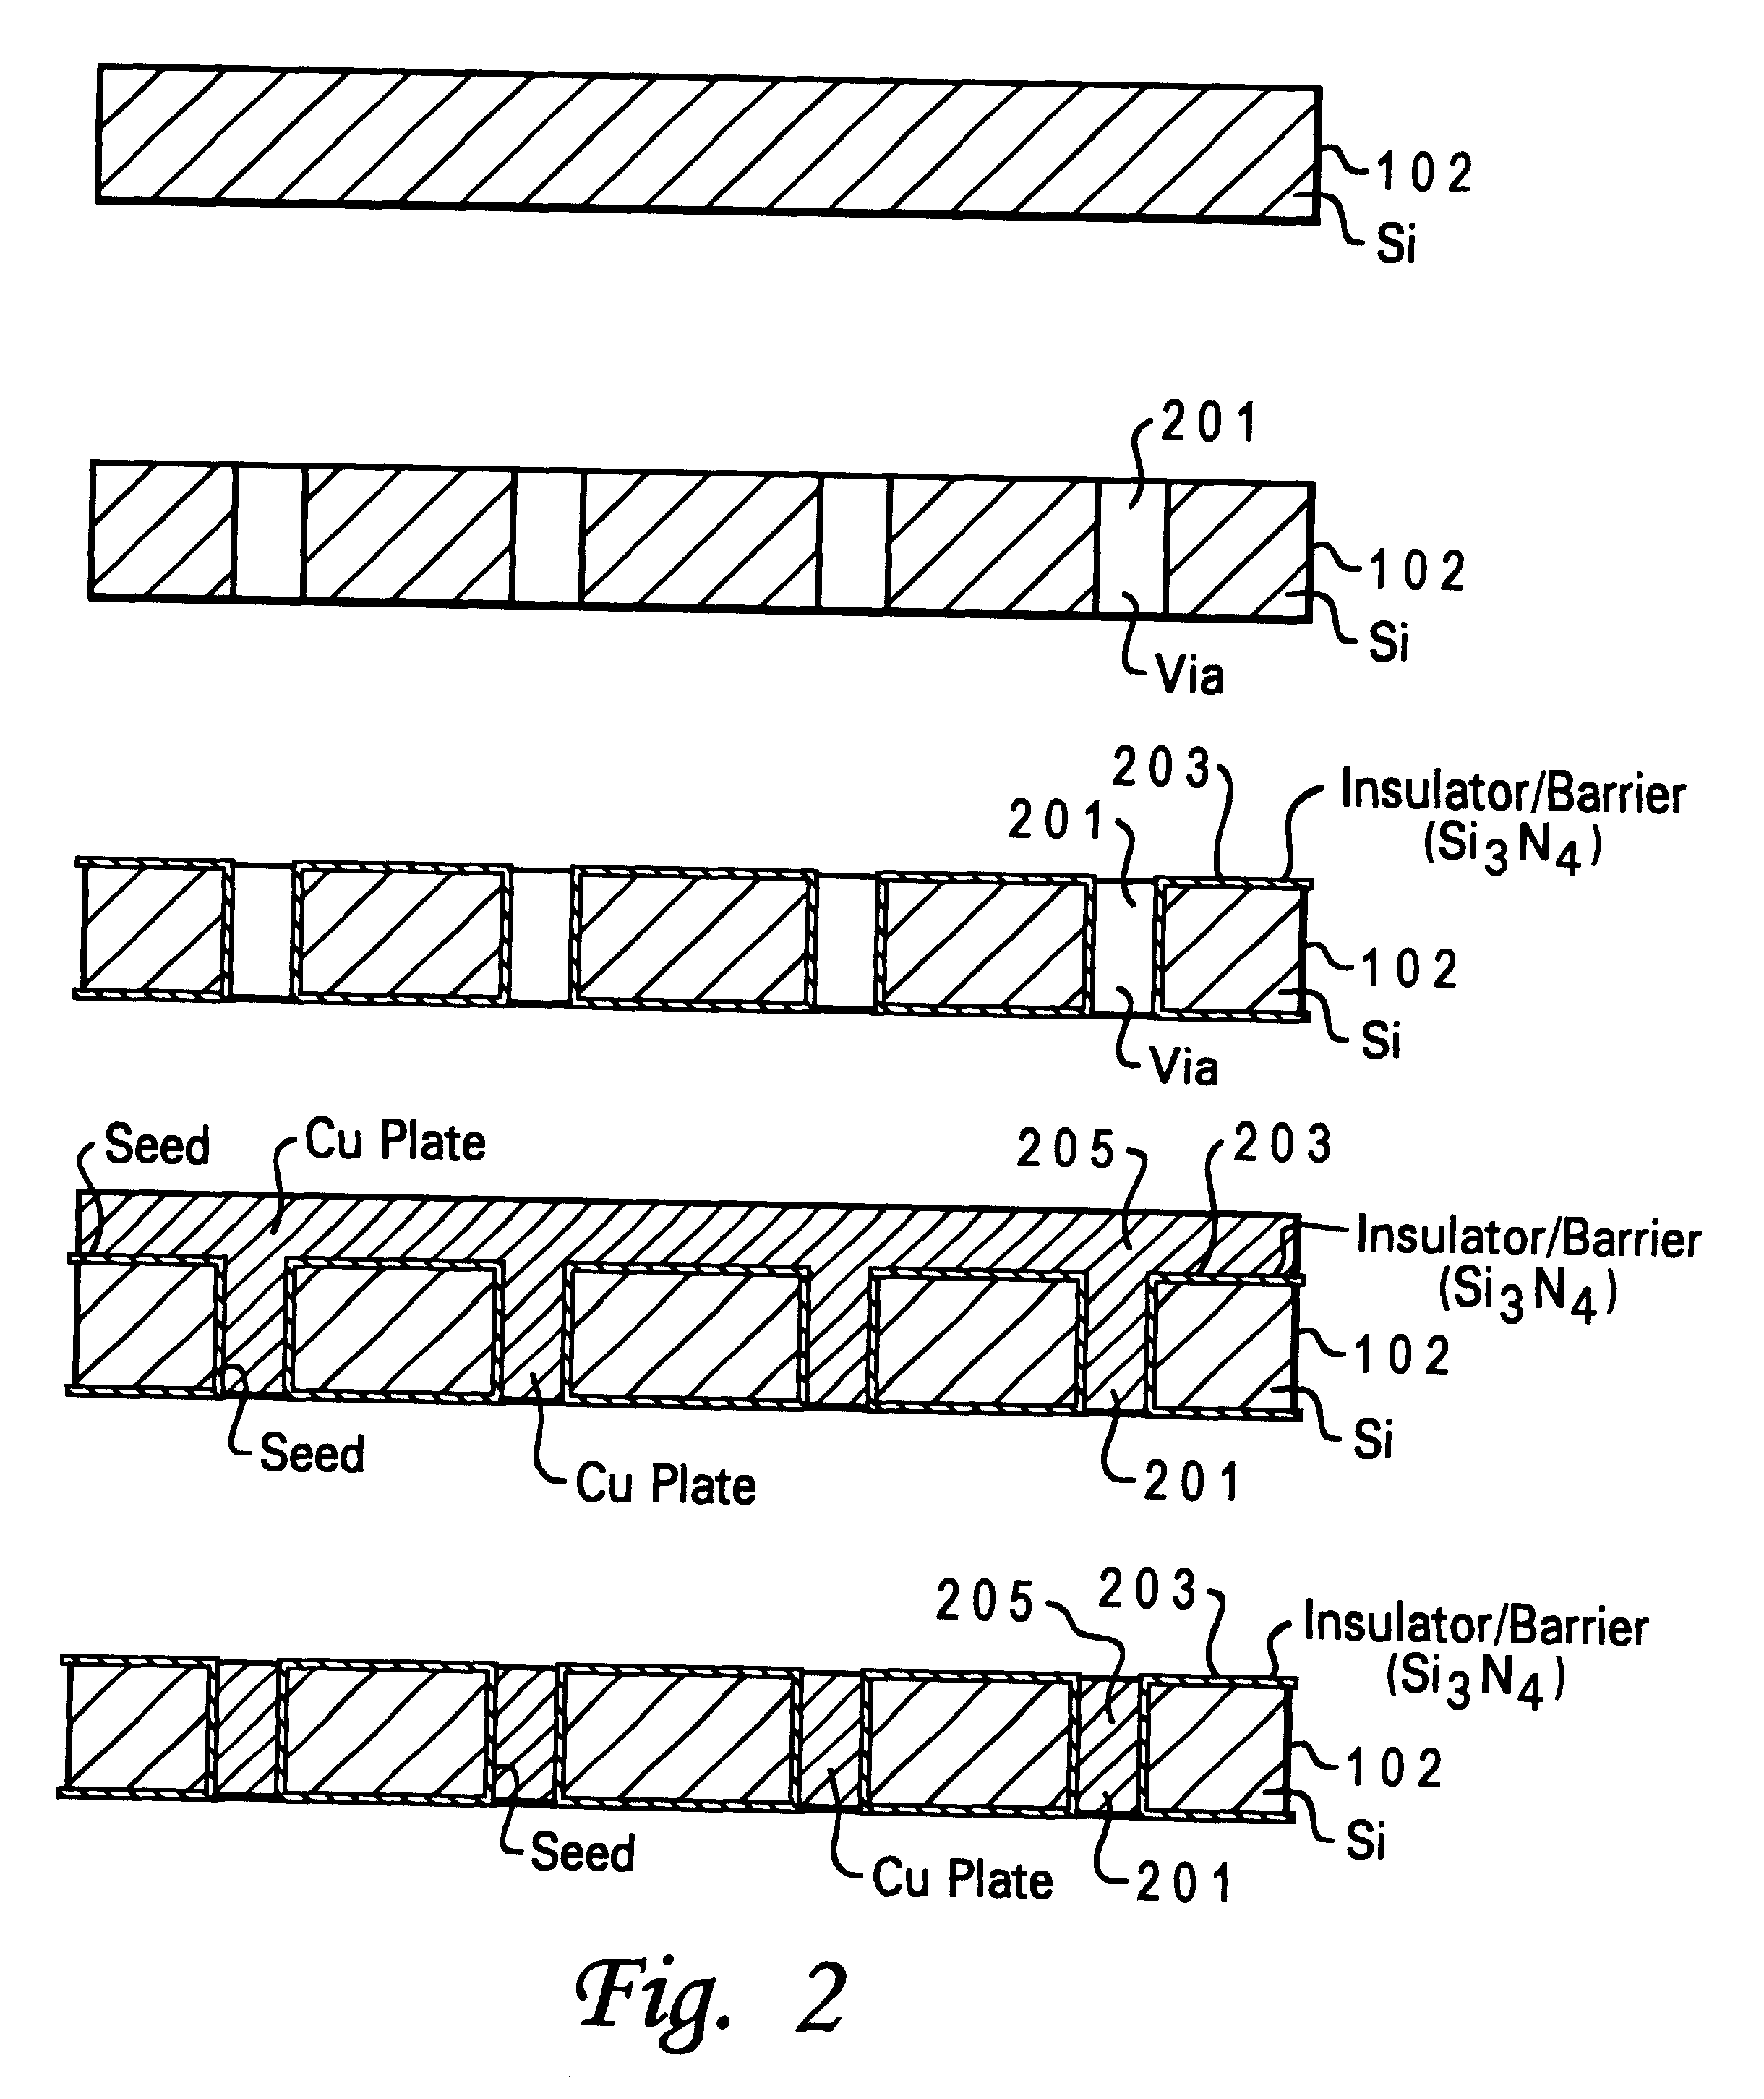 Method for integrated circuit power and electrical connections via through-wafer interconnects